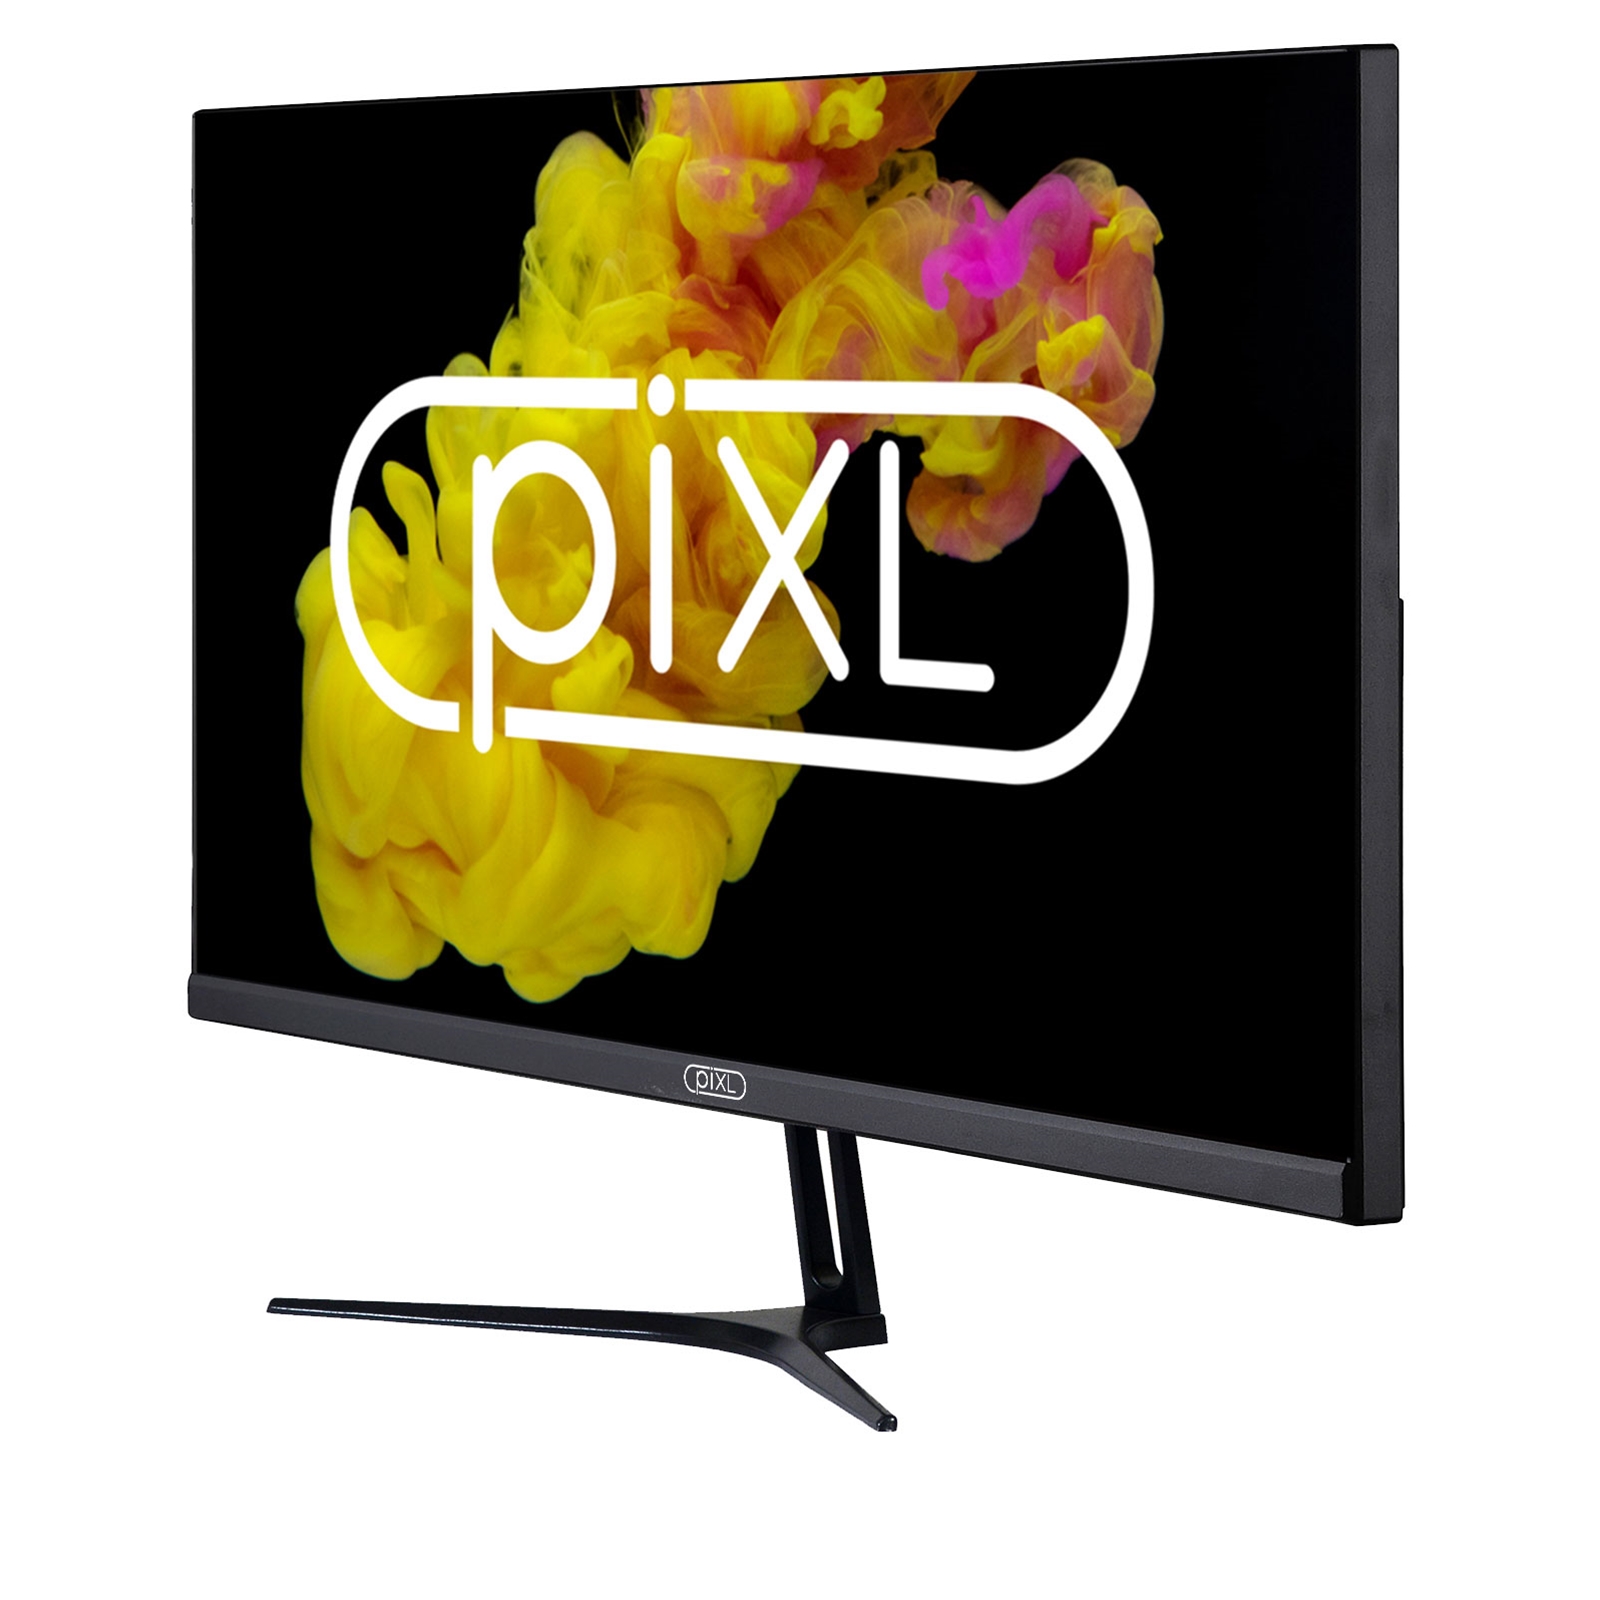 piXL PX24IVHF 24 Inch Frameless Monitor, Widescreen IPS LCD Panel, 5ms Response Time, 75Hz Refresh Rate, Full HD 1920 x 1080, VGA, HDMI, Internal PSU, 16.7 Million Colour Support, Black Finish, 3 Year Warranty